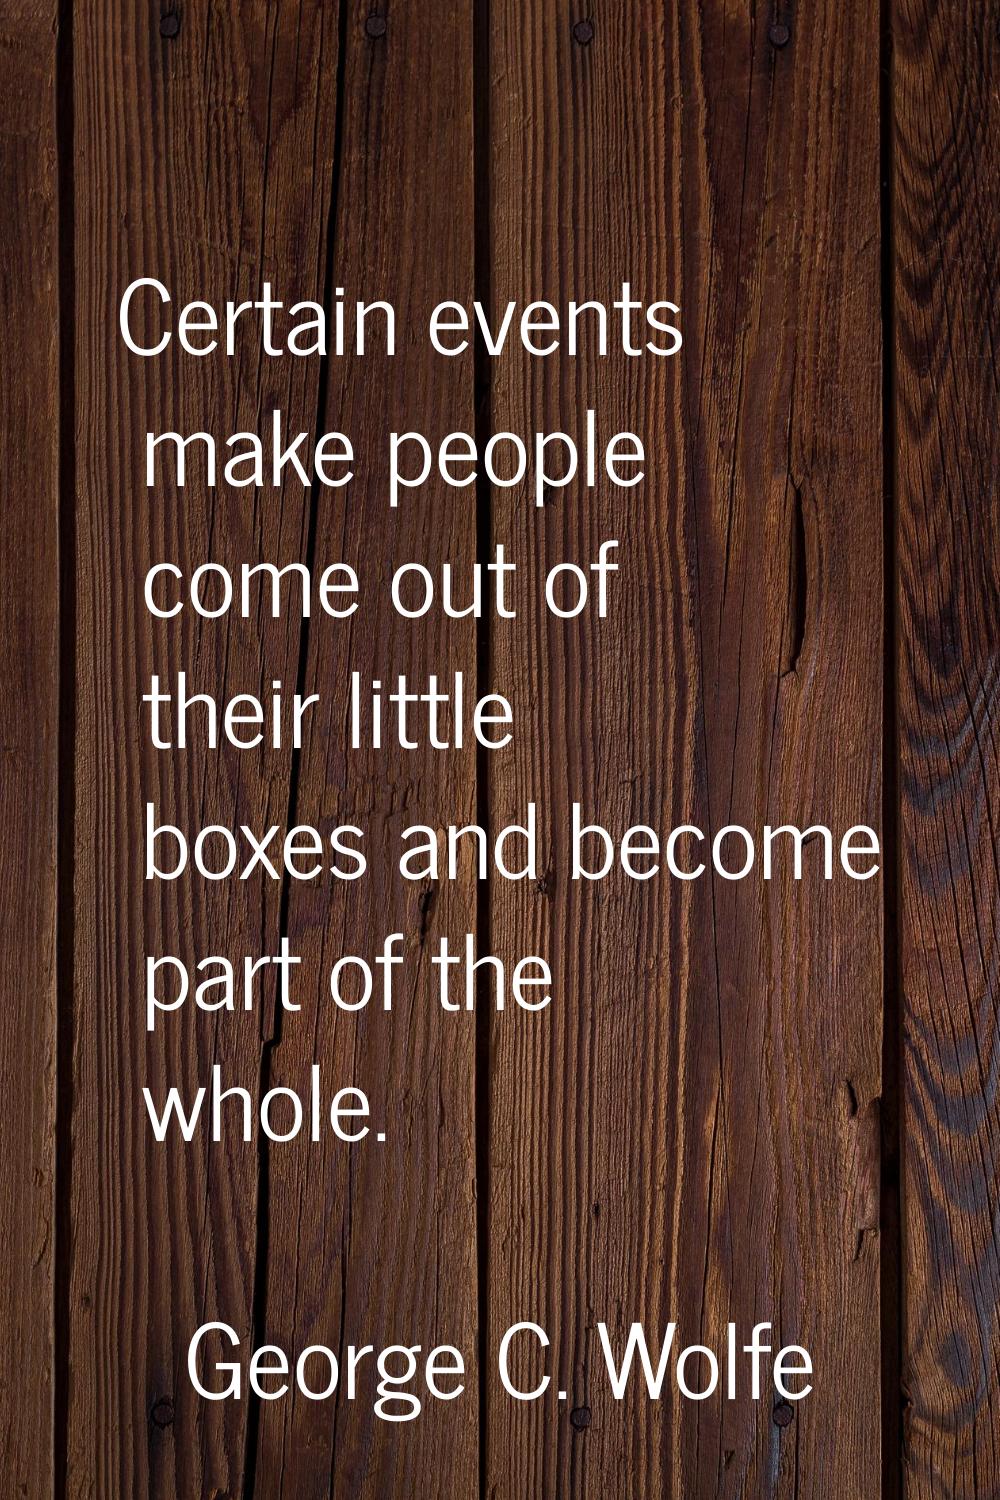 Certain events make people come out of their little boxes and become part of the whole.